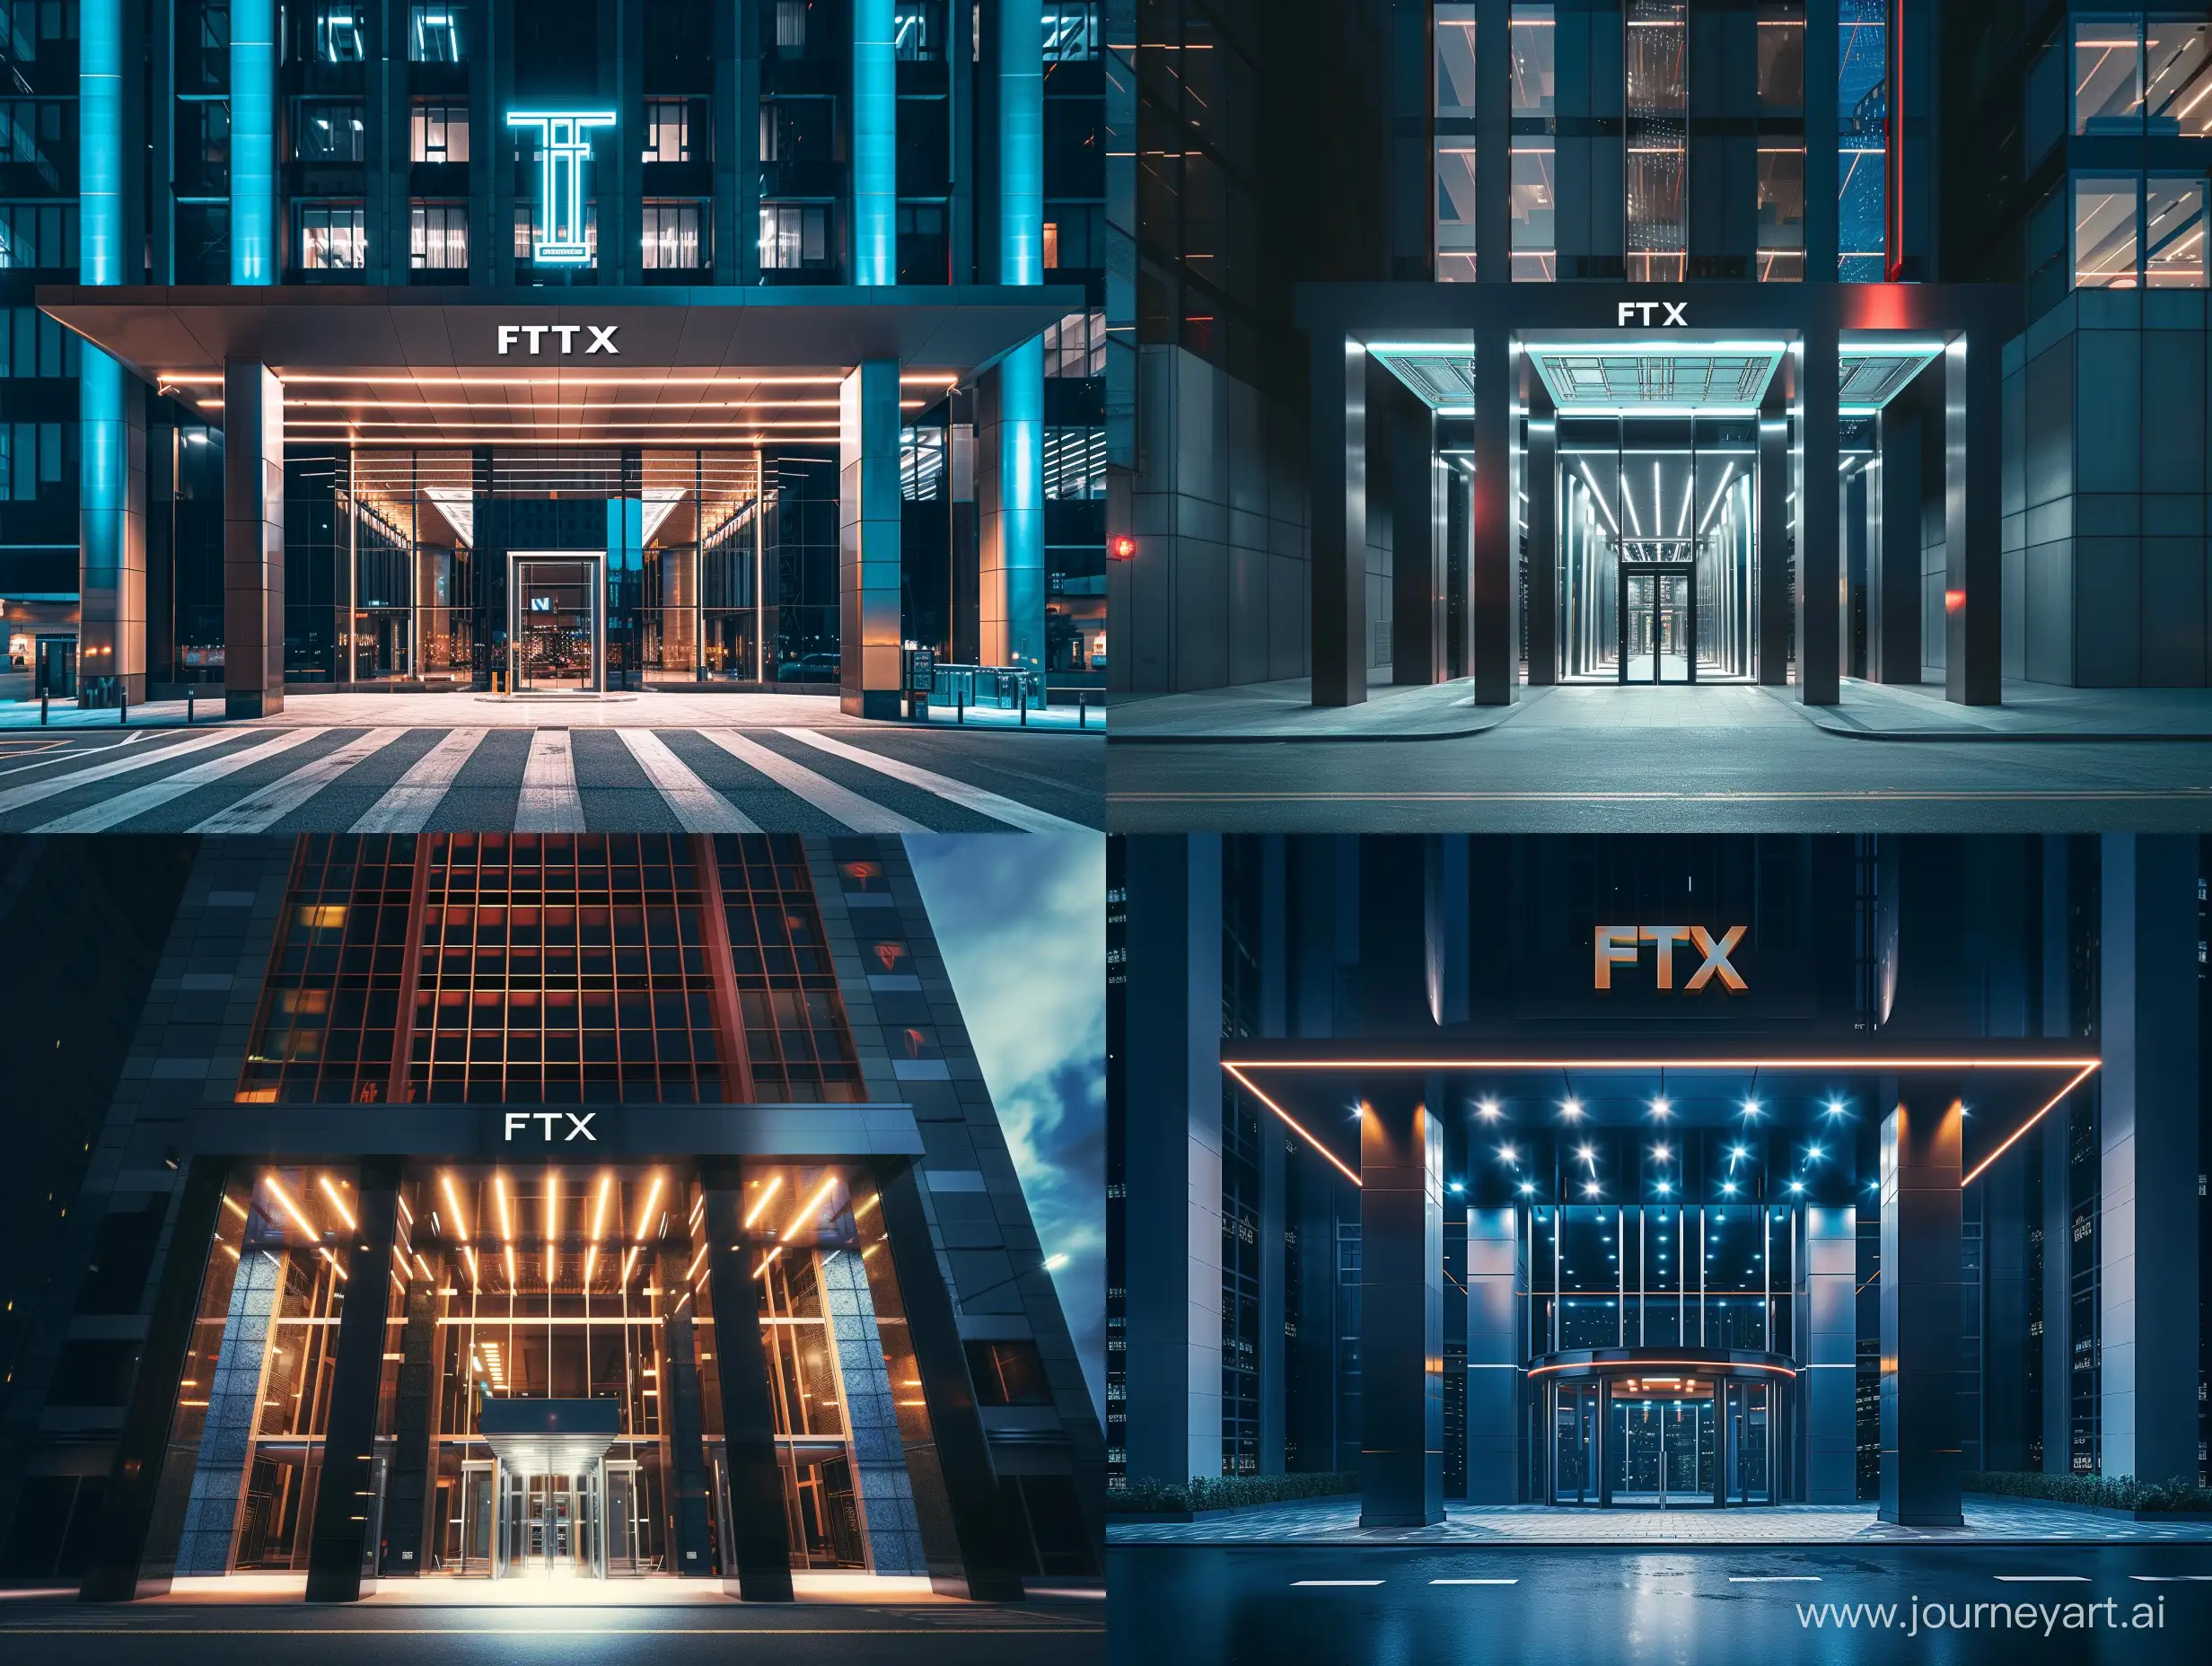 A cinematic photo of a modern skyscraper office building at night with the FTX logo above the entrance